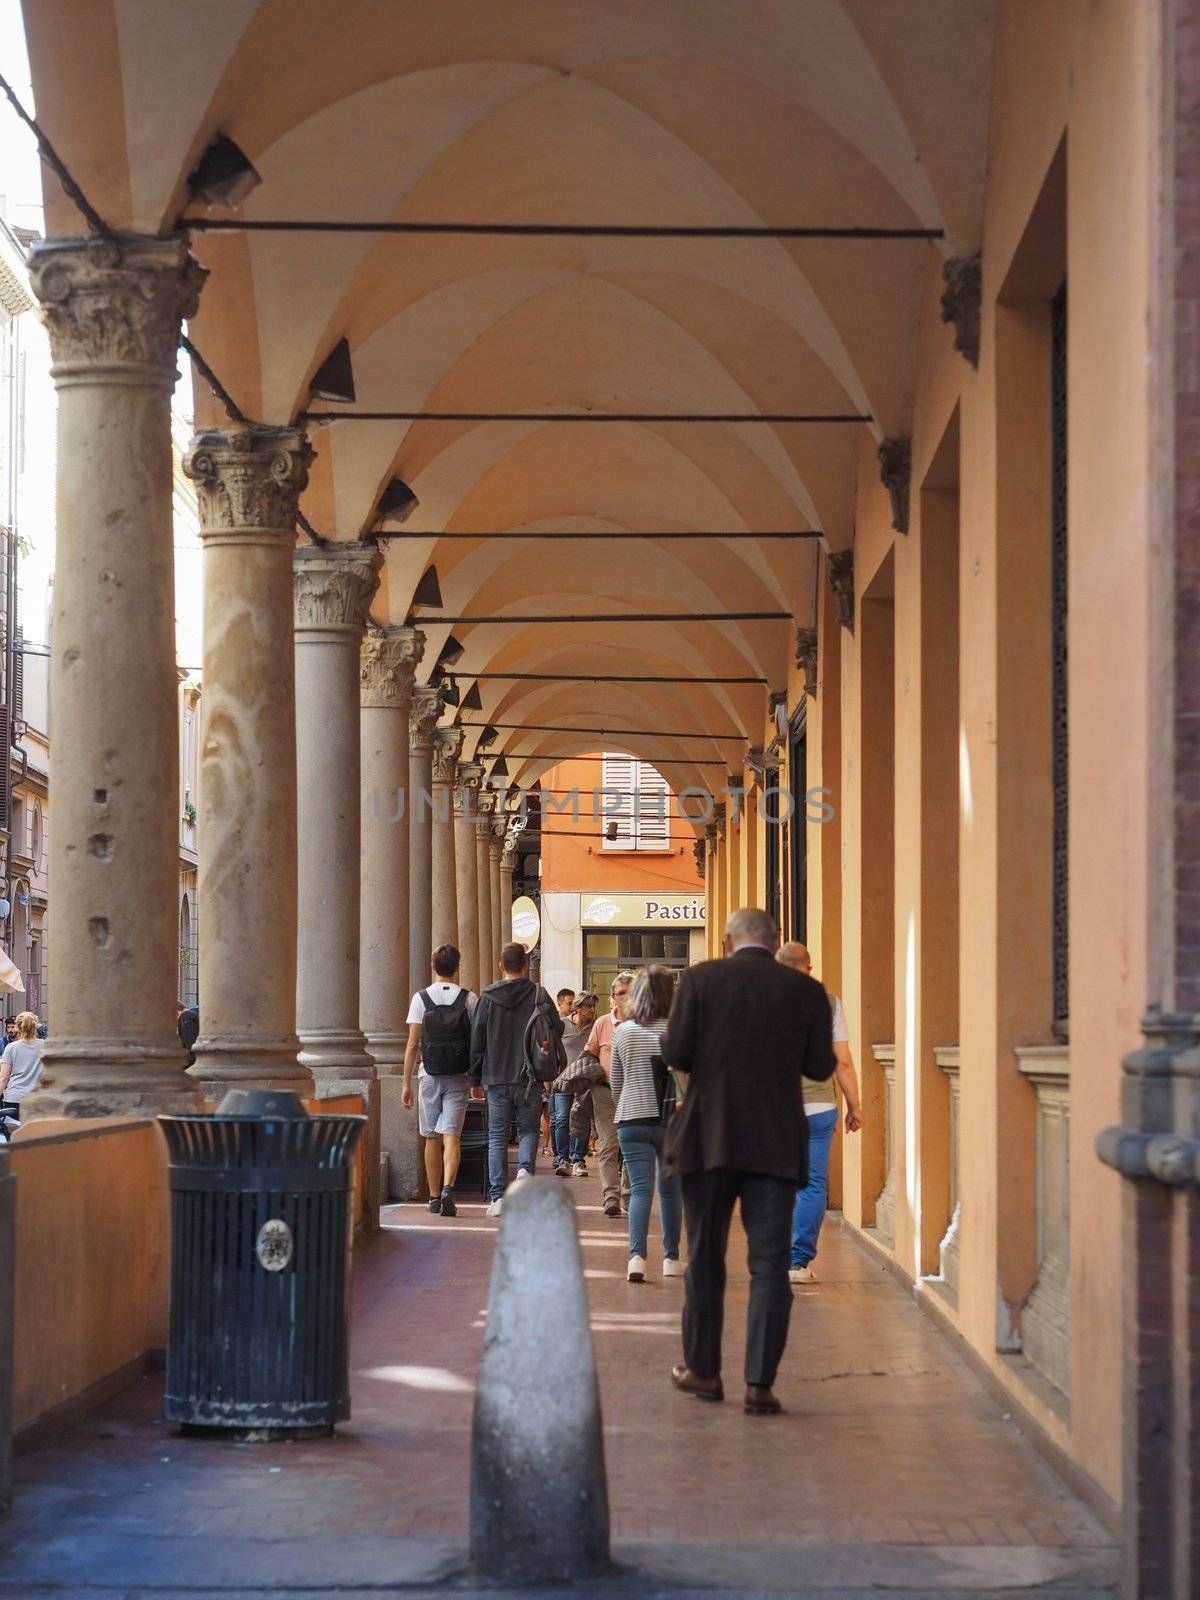 BOLOGNA, ITALY - CIRCA SEPTEMBER 2018: People in the city centre